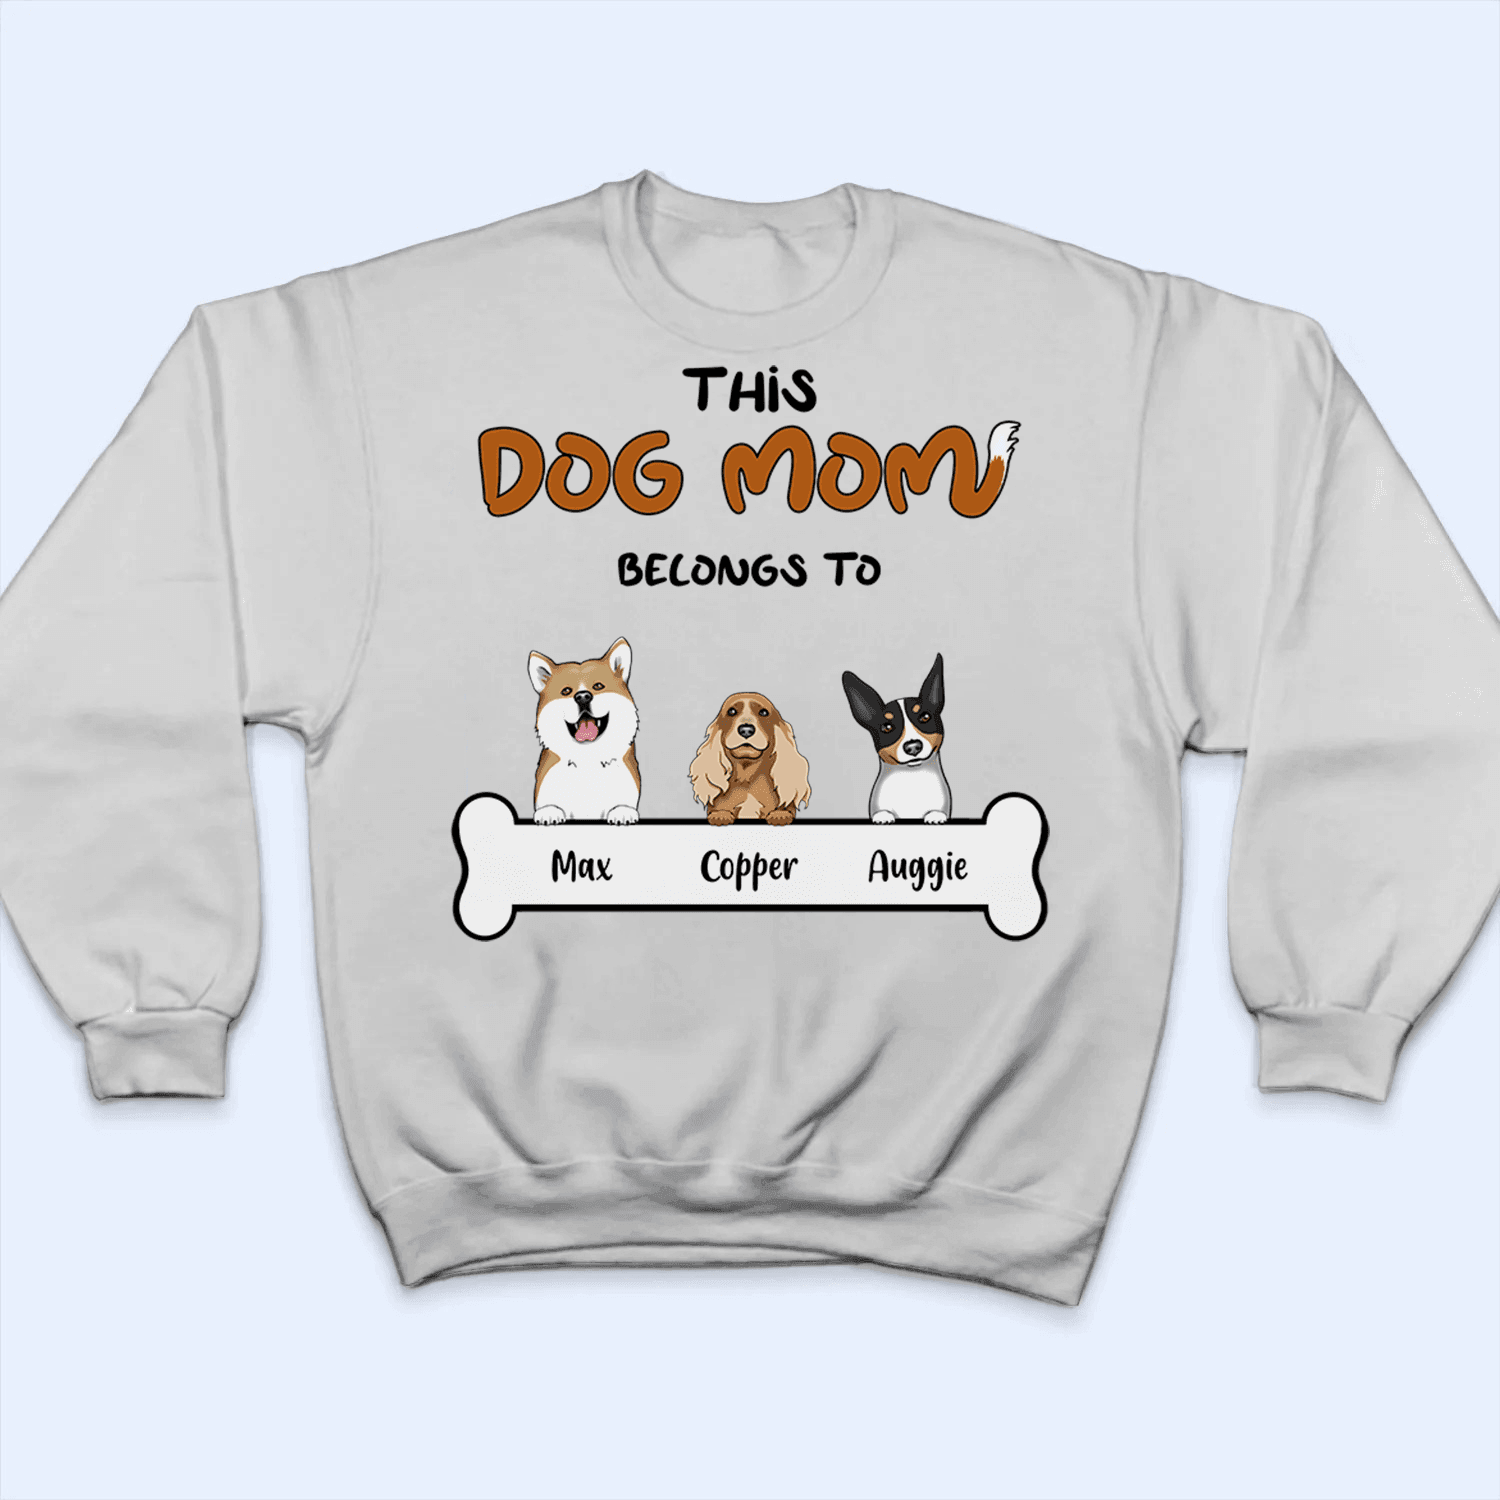 This Dog Mom belongs to - Personalized Custom T Shirt - Birthday, Loving, Funny Gift For Dog Mom, Dog Owner, Dog Lover - Suzitee Store